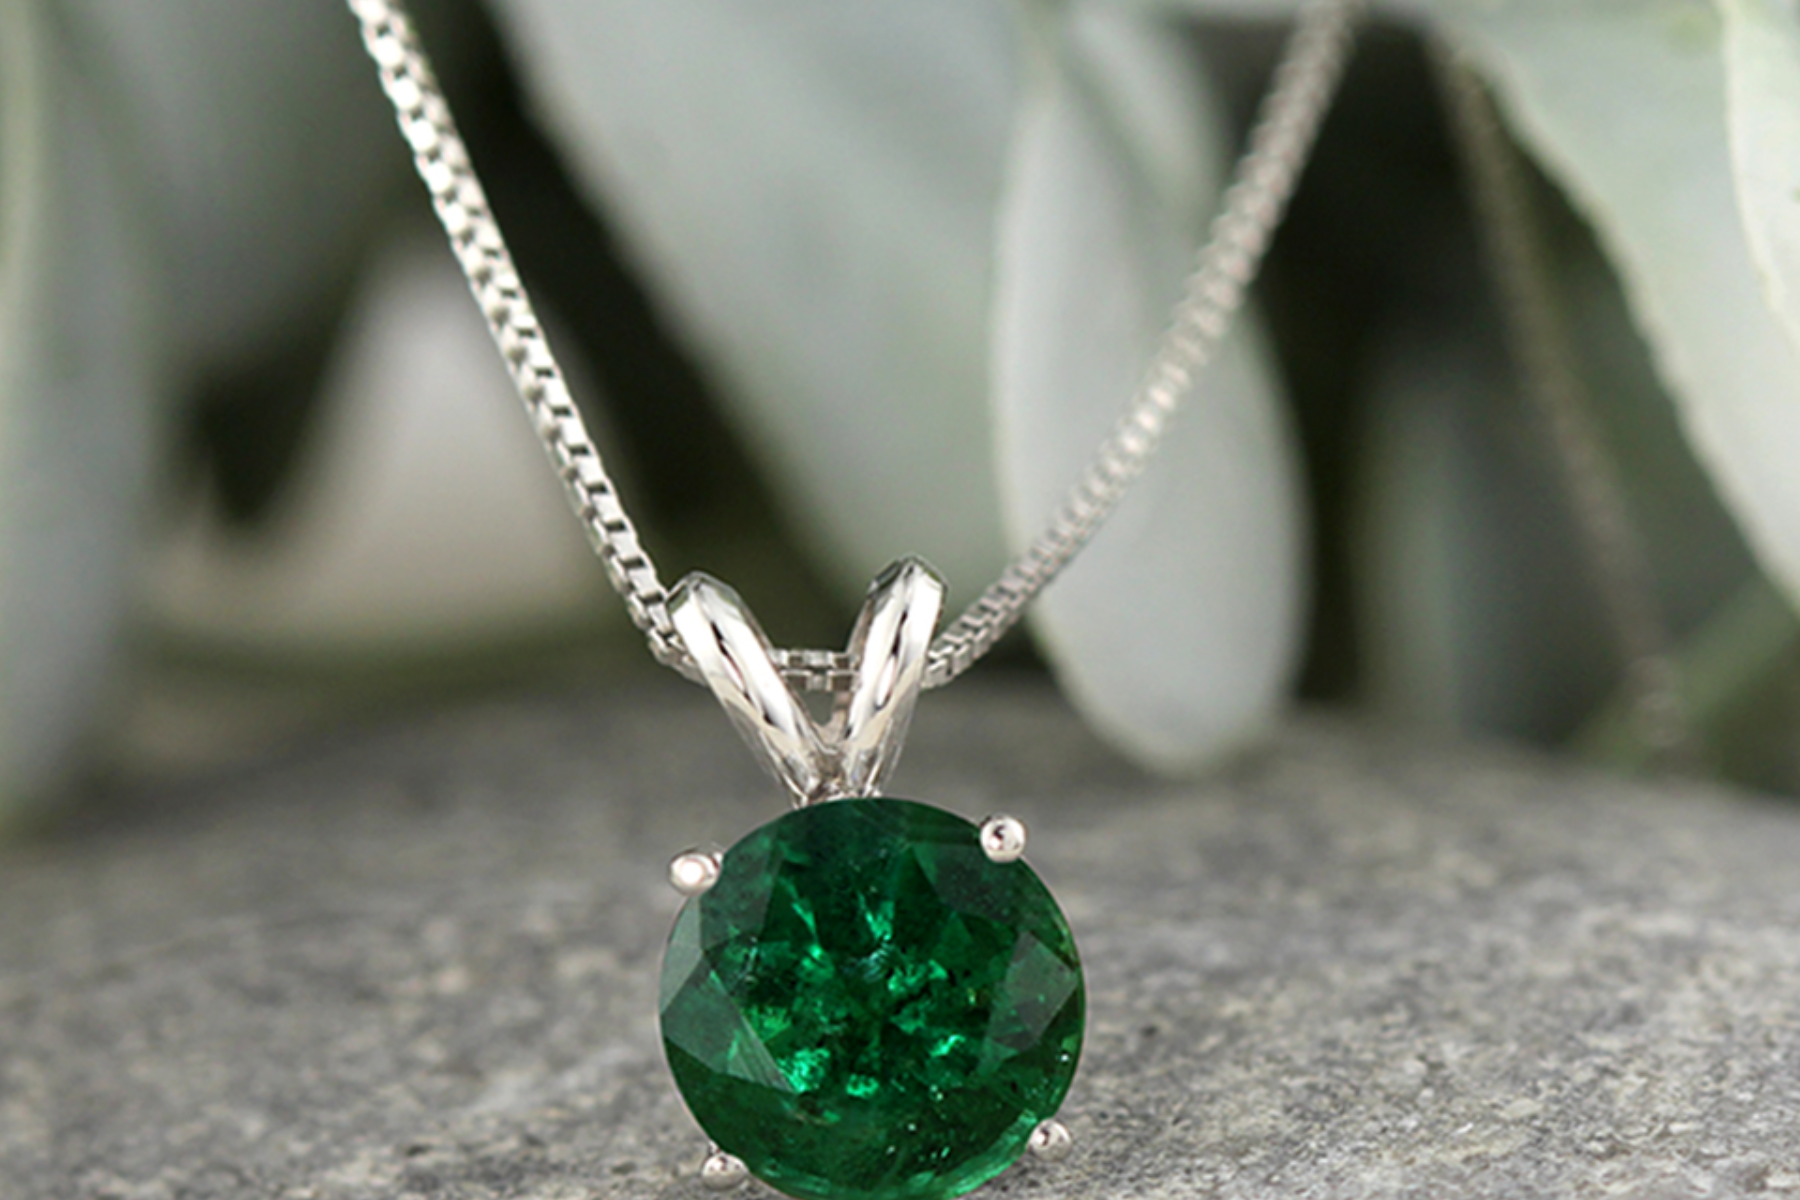 Necklace with an emerald pendant